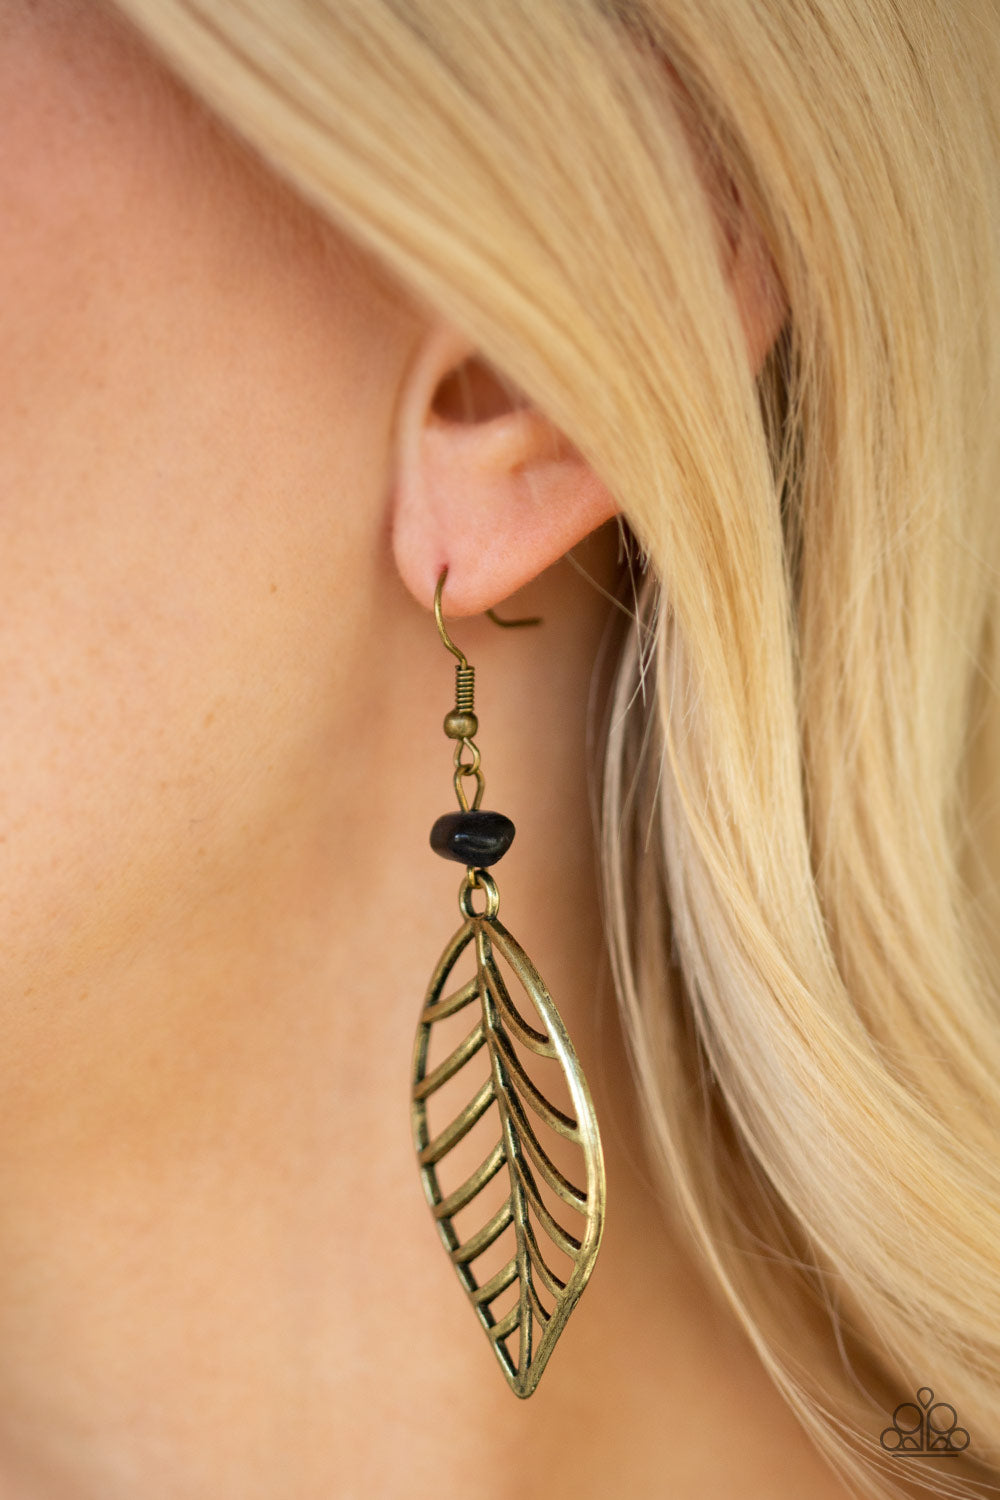 BOUGH Out - Brass Earring Paparazzi Accessories $5 Jewelry